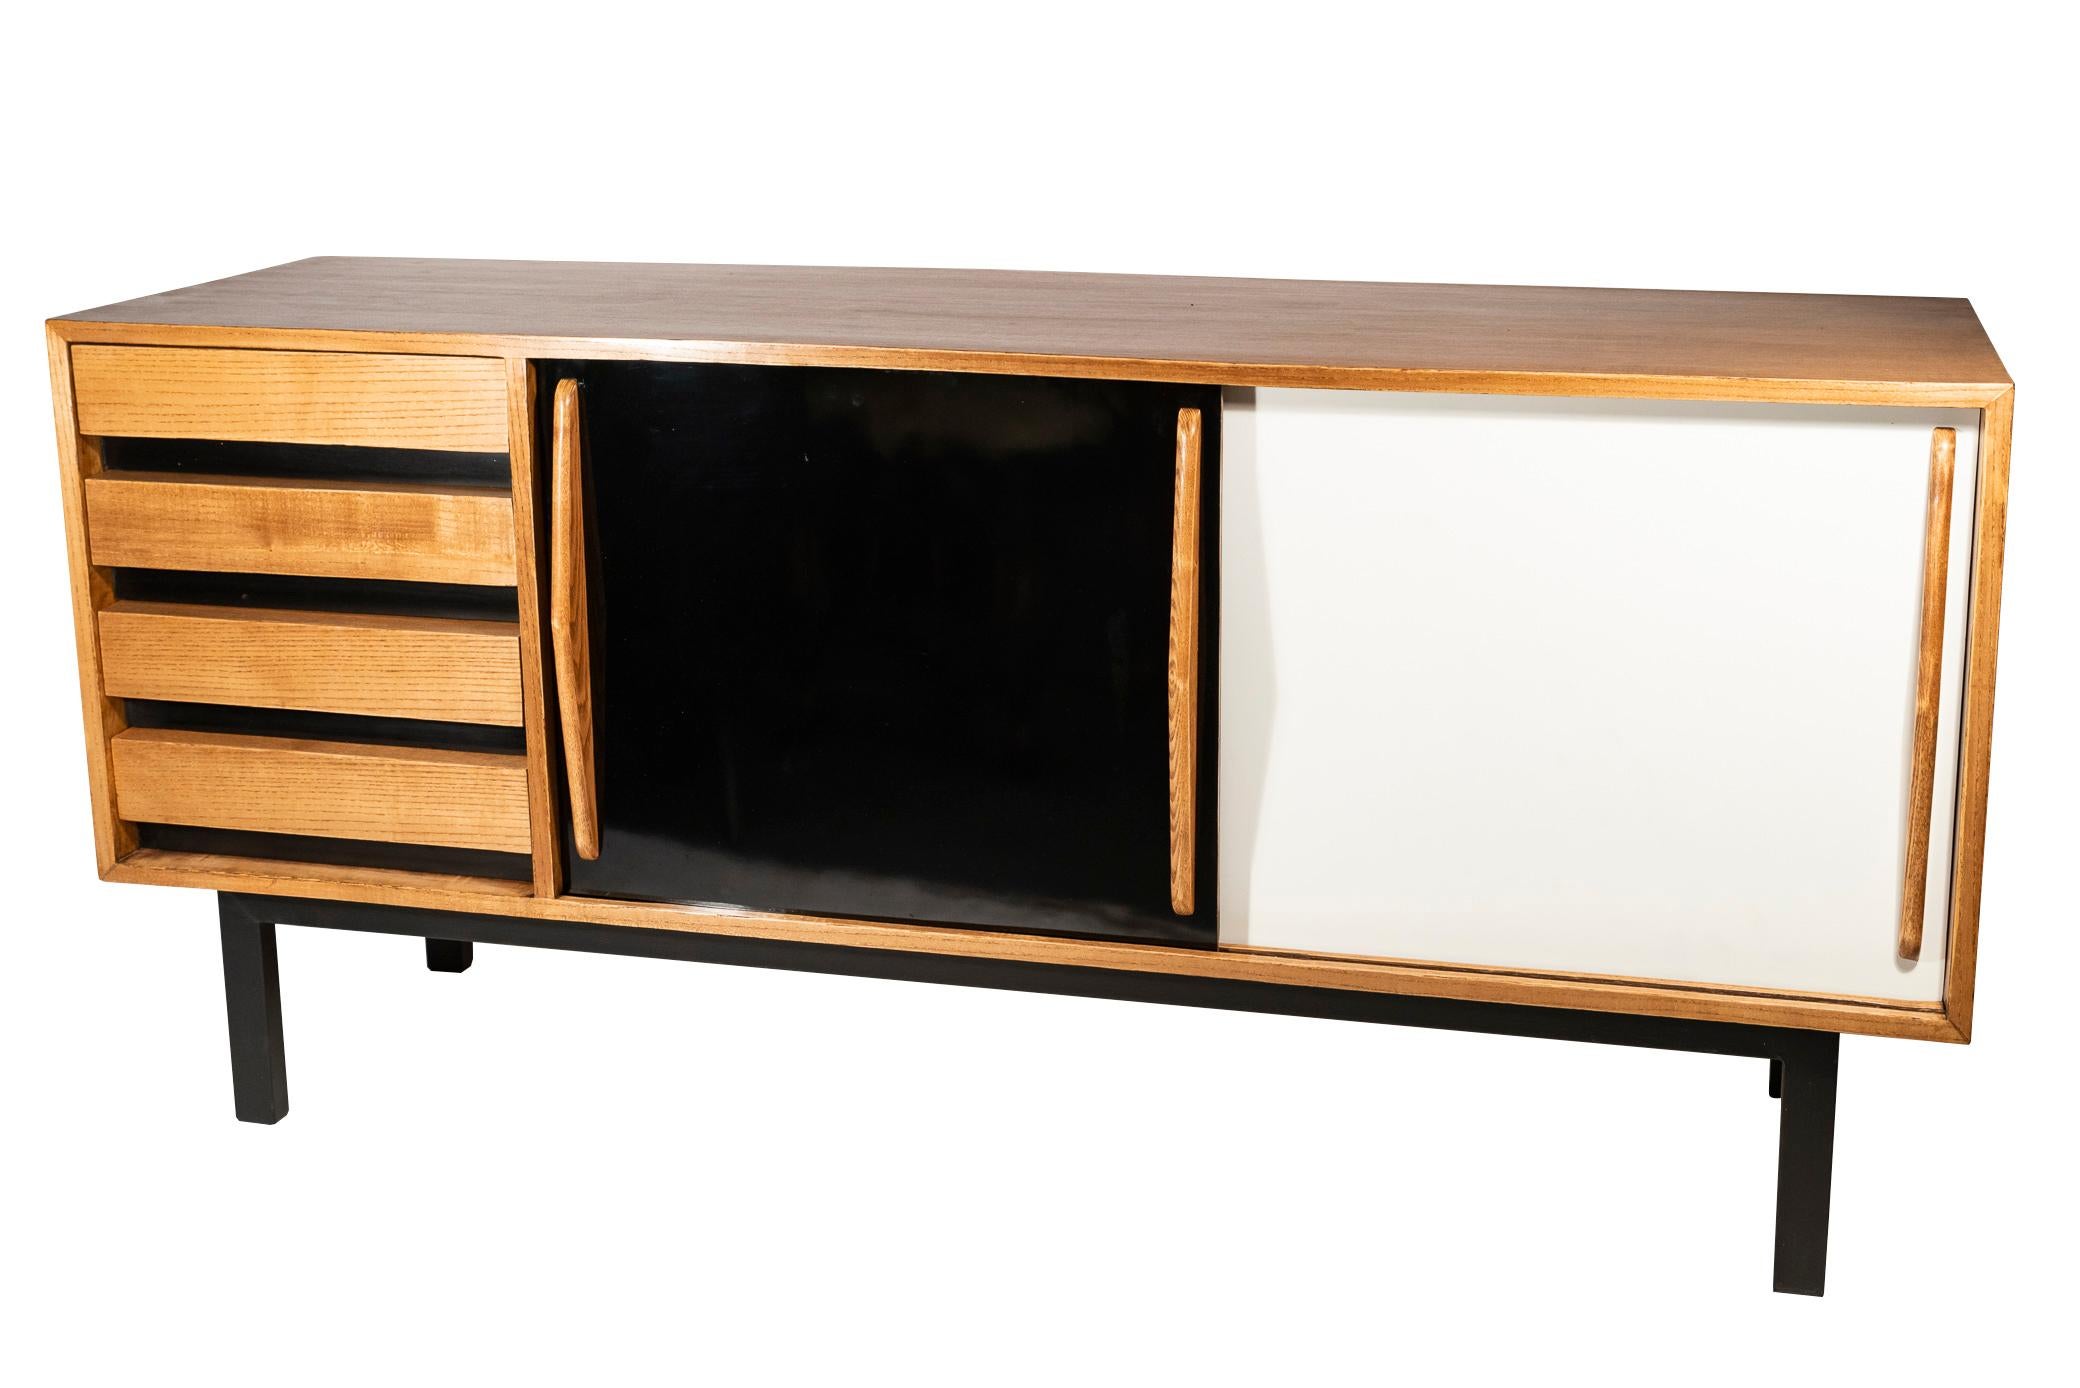 Charlotte Perriand (1903-1999), sideboard, France, circa 1958. 
Cité Cansado, Mauritania. 
Published by Steph Simon, France. Modèle Charlotte Perriand / Brevet SGDG. 

Measures: Height 70 cm, depth 45 cm, width 158 cm.